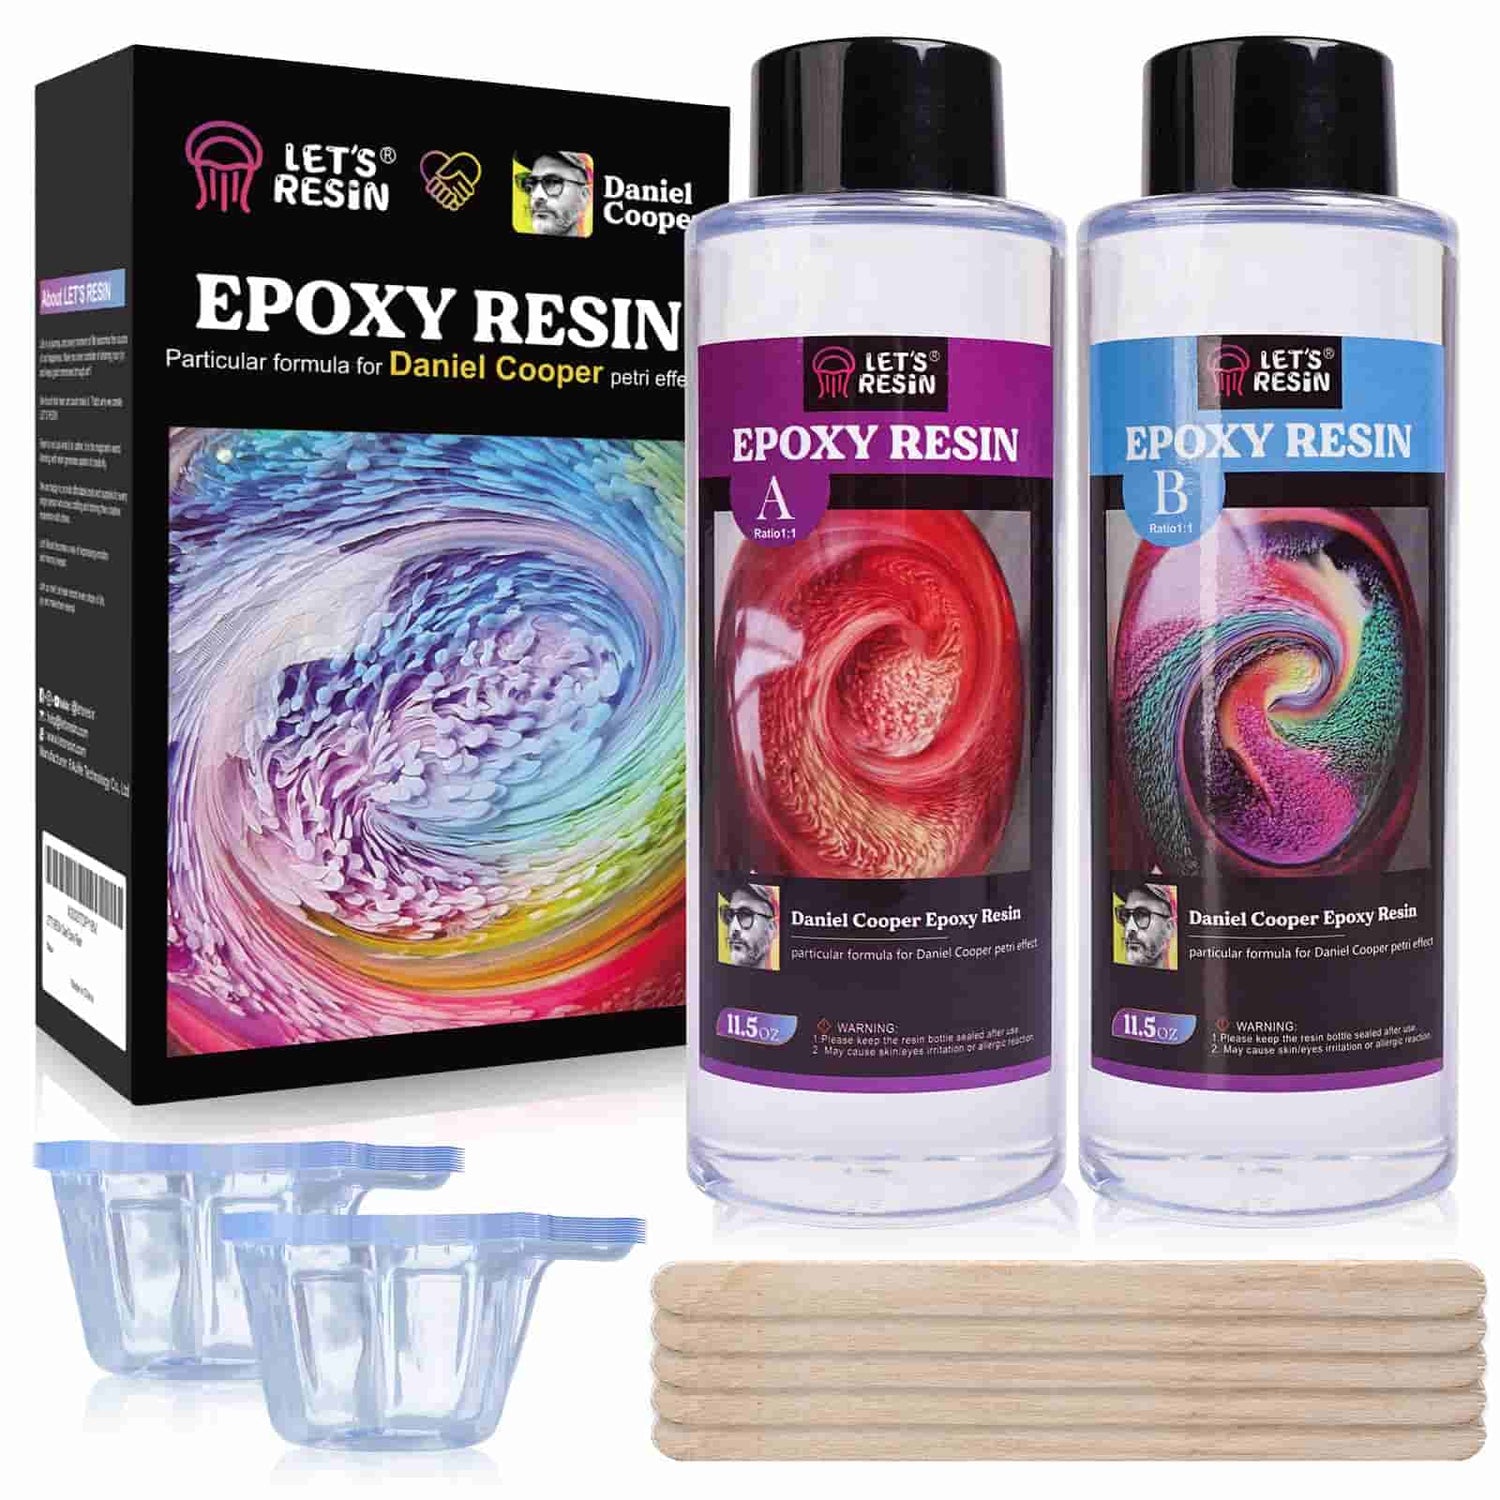 Buy Resin Tray Kit Mould From leading epoxy resin suppliers in the